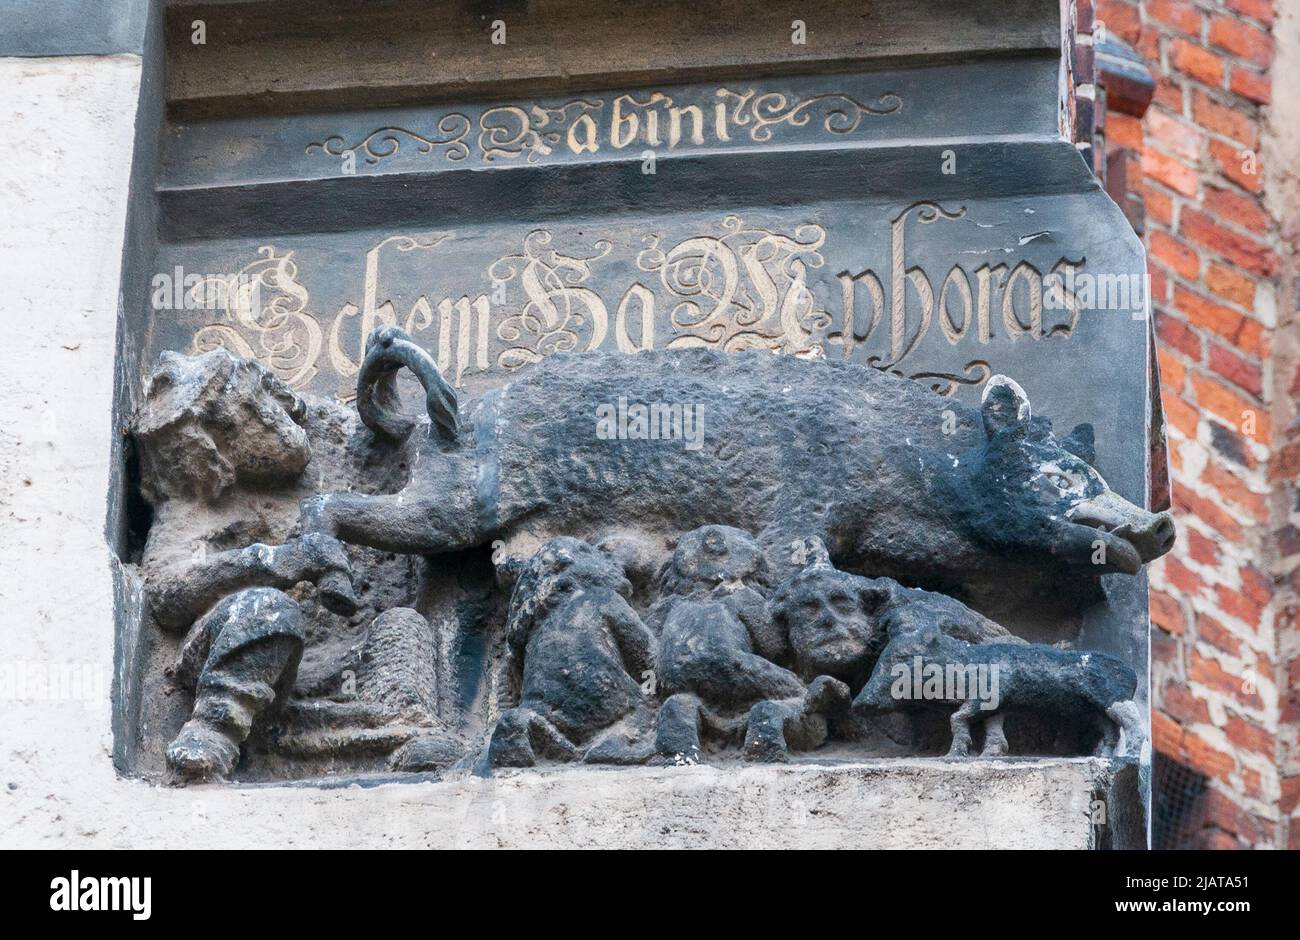 'Judensau' anti-Semitic sculpture on facade of protestant church in Wittenberg, Germany Stock Photo